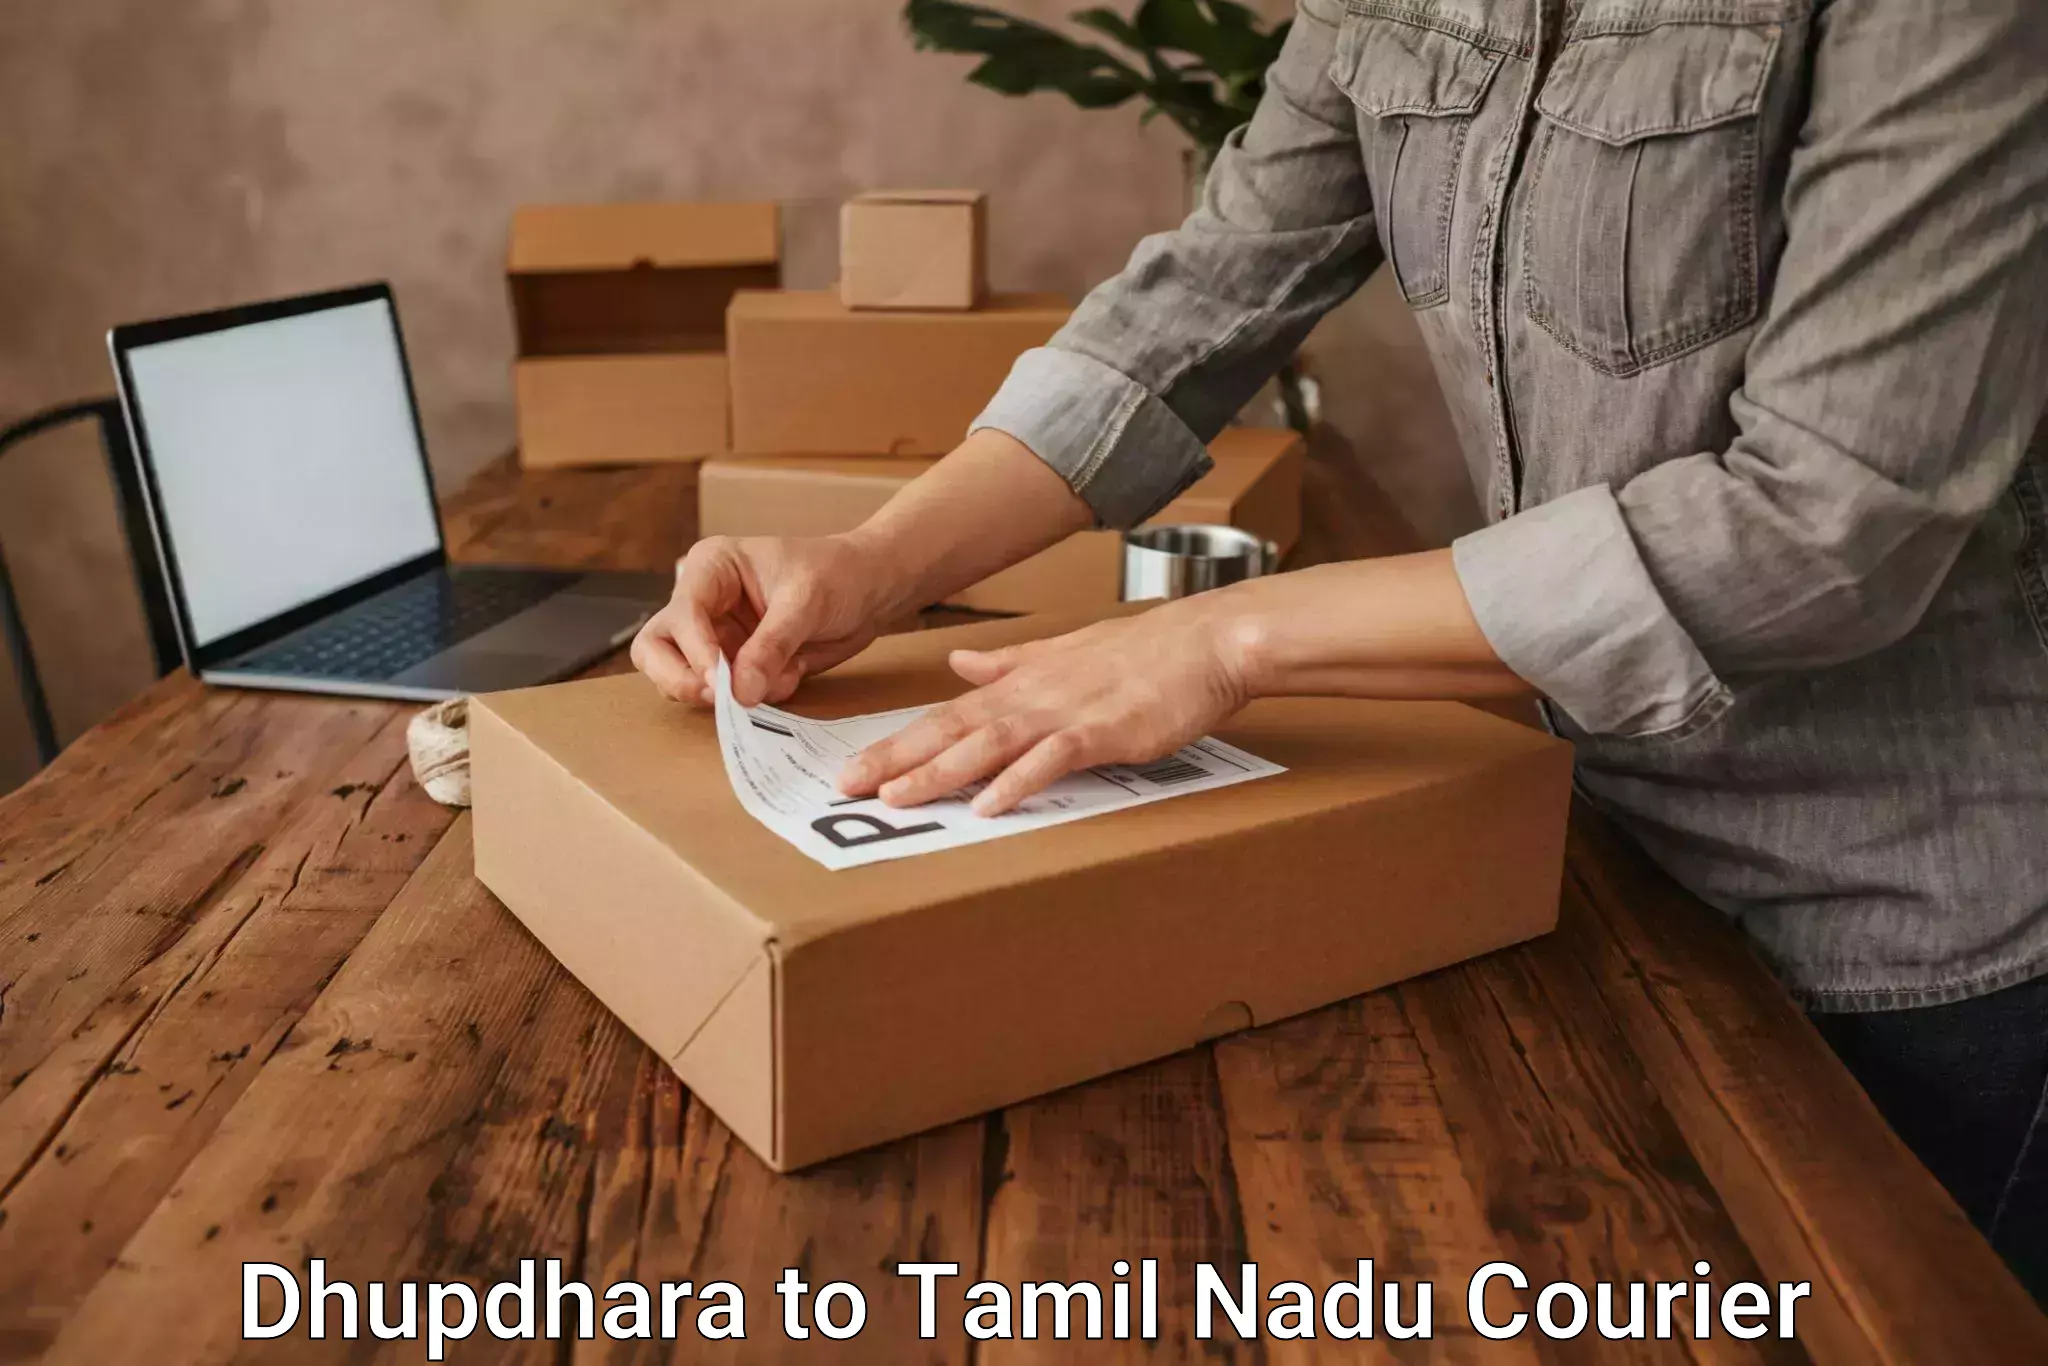 Courier service innovation in Dhupdhara to Chennai Port